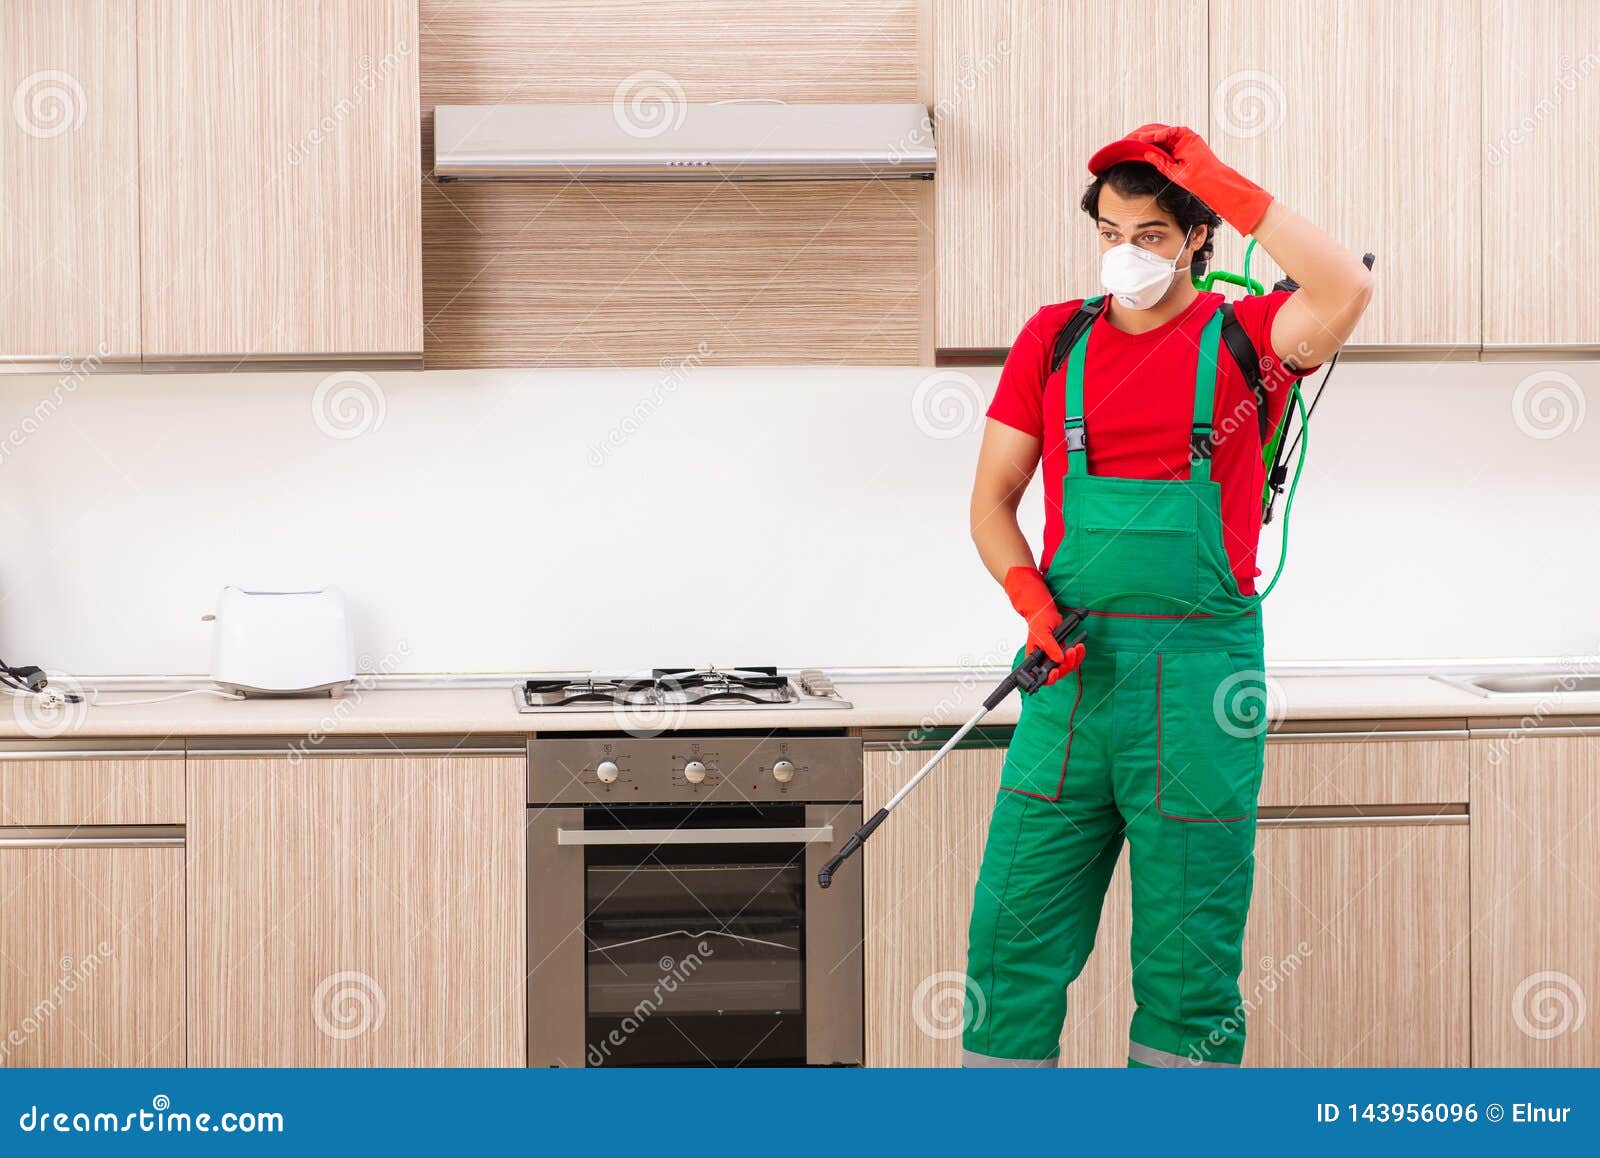 The Professional Contractor Doing Pest Control At Kitchen Stock Photo - Image of exterminator ...